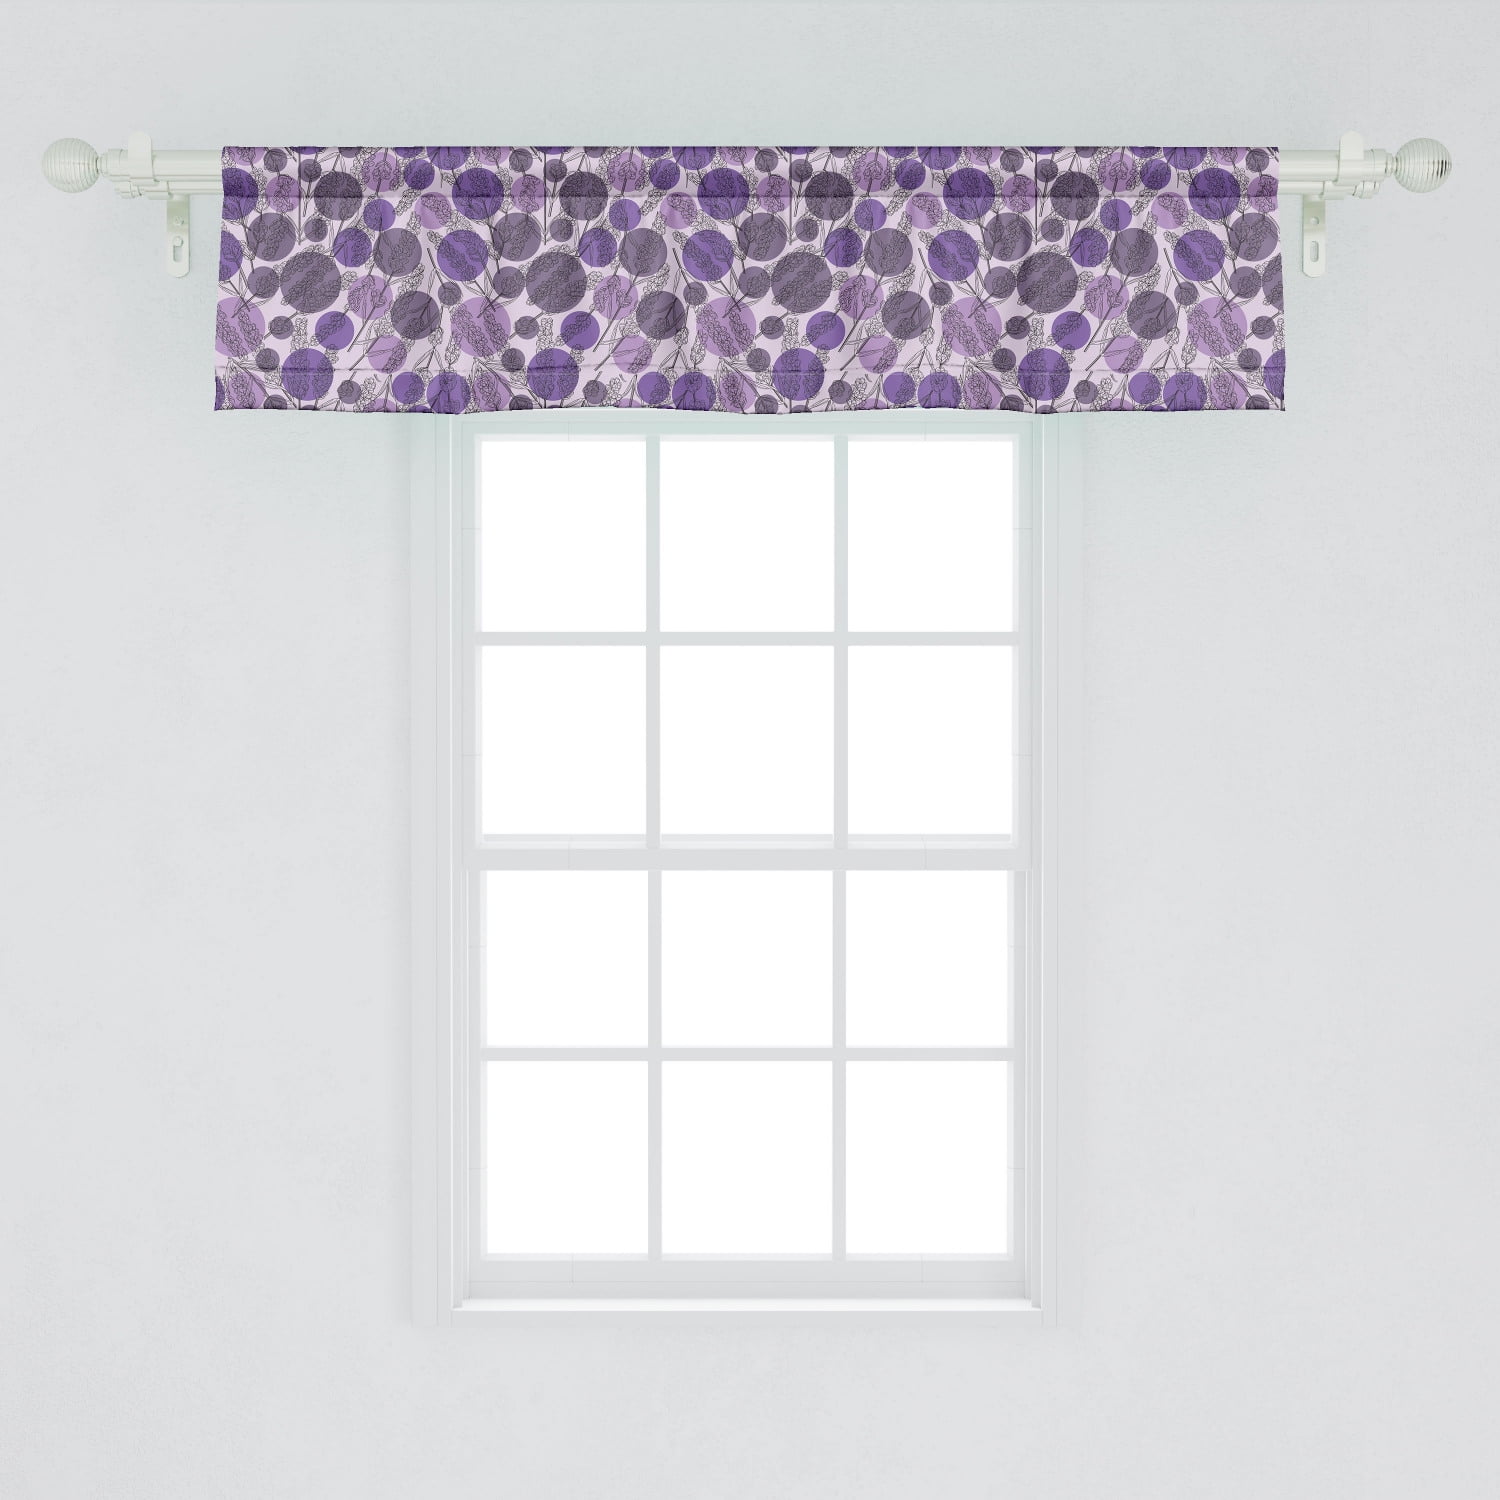 Windows Valances Curtain Red Plum Blossom Kitchen Valances Rod Pocket Flower White Window Treatment Short Topper Curtains for Kitchen Bathroom Living Room 1 Panel,54 by 18 inches 